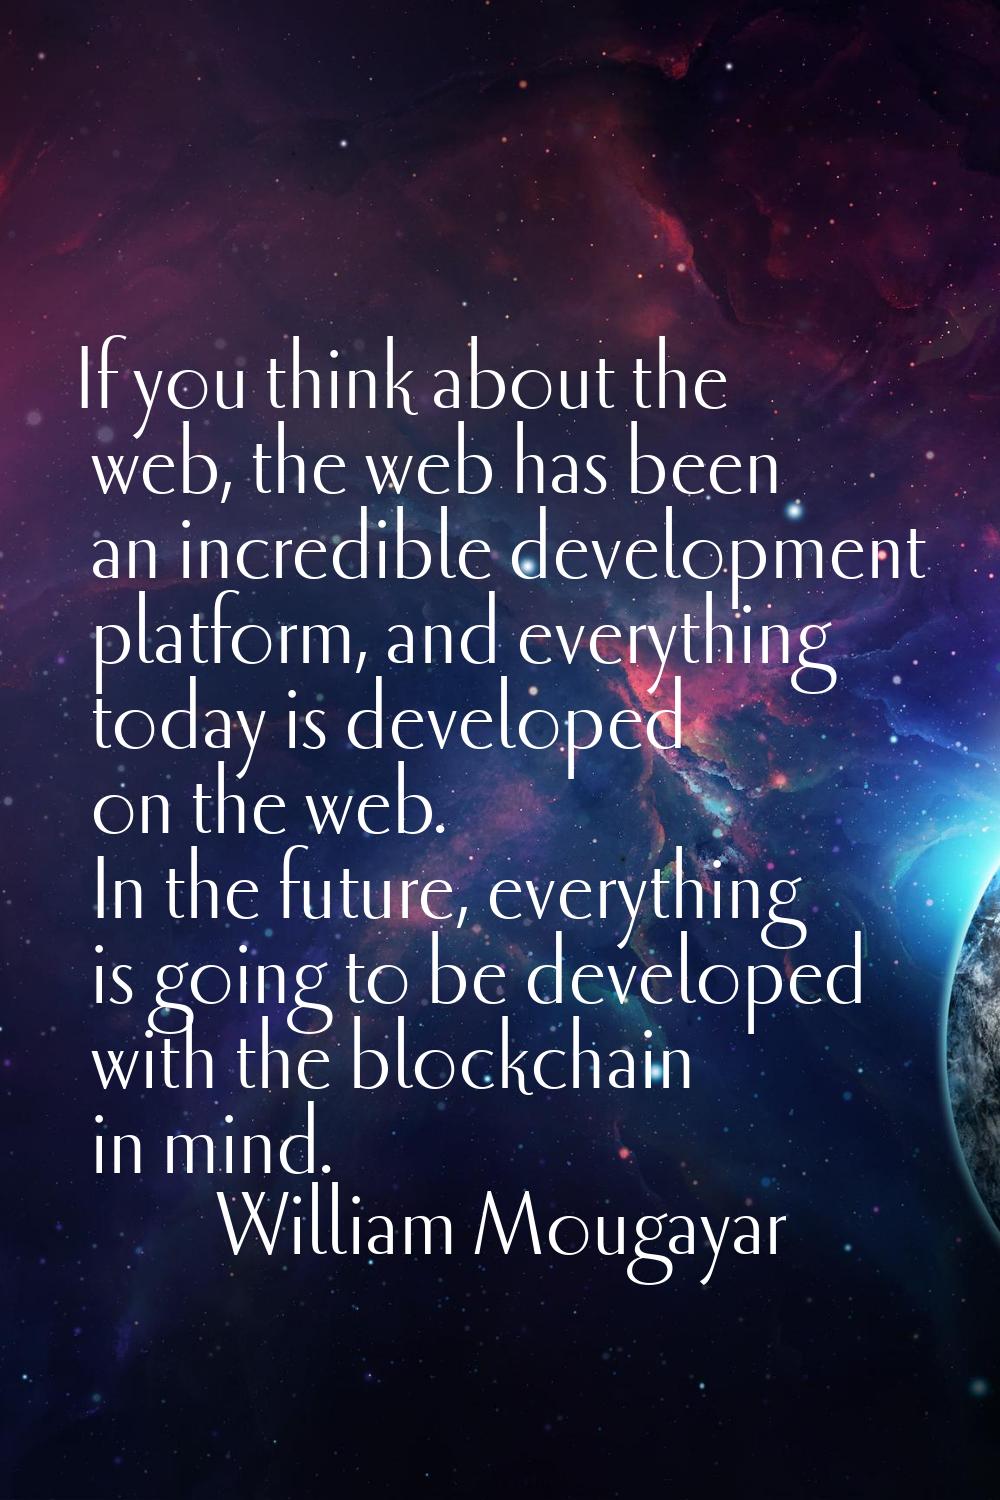 If you think about the web, the web has been an incredible development platform, and everything tod